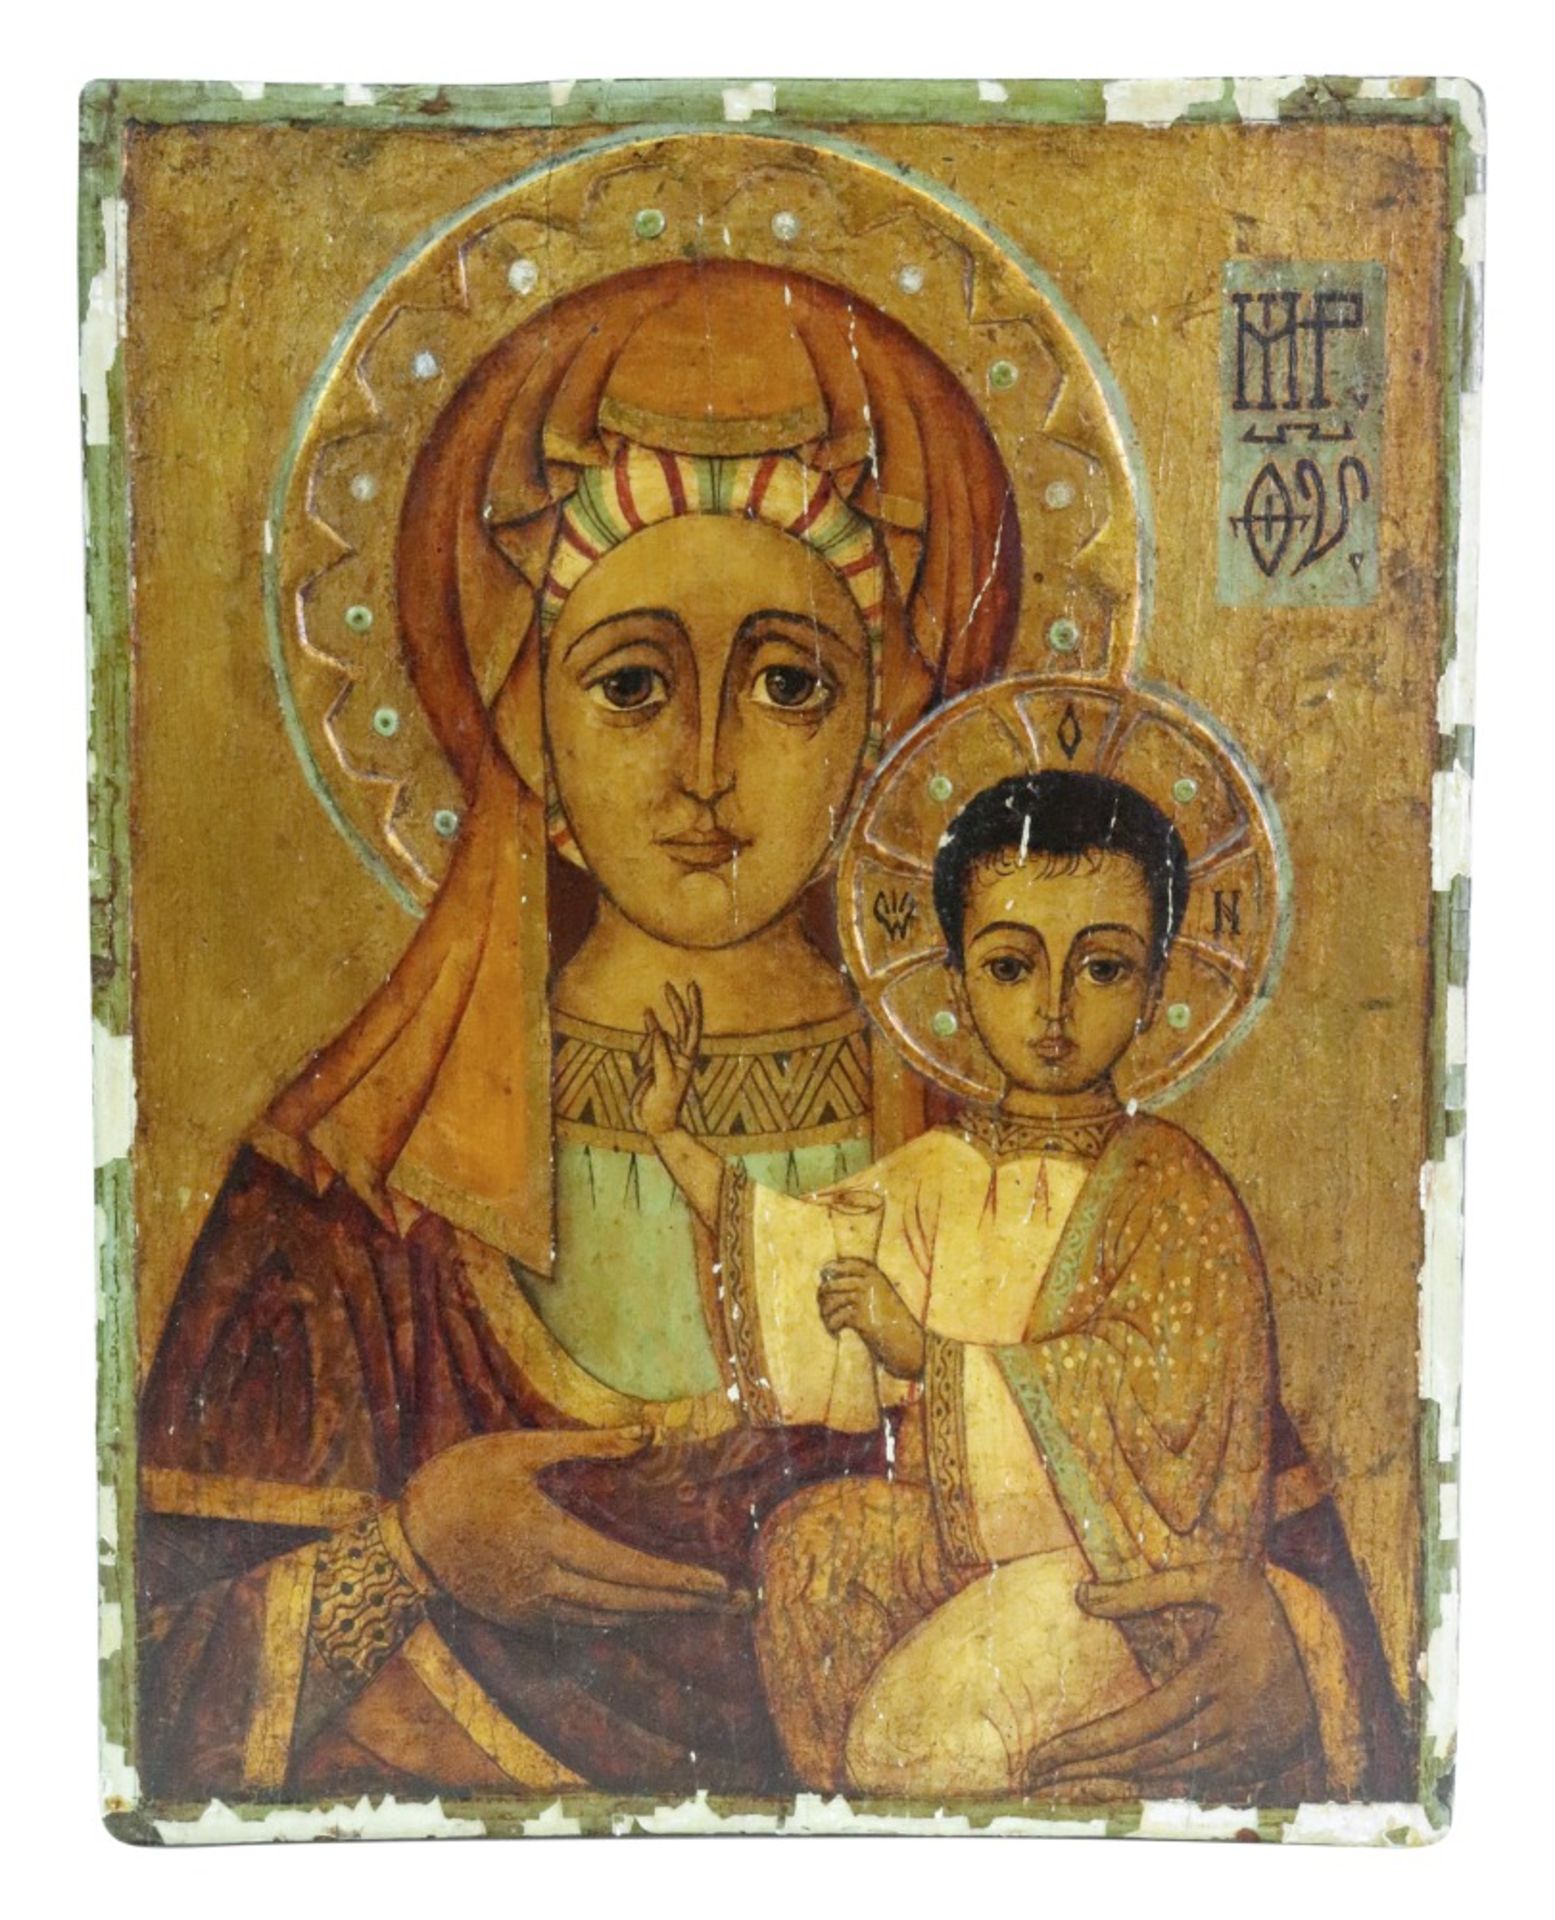 A Russian Icon depicting Christ and the Virgin Mary, 33 x 27cm. Purchased in Moscow in 1959.